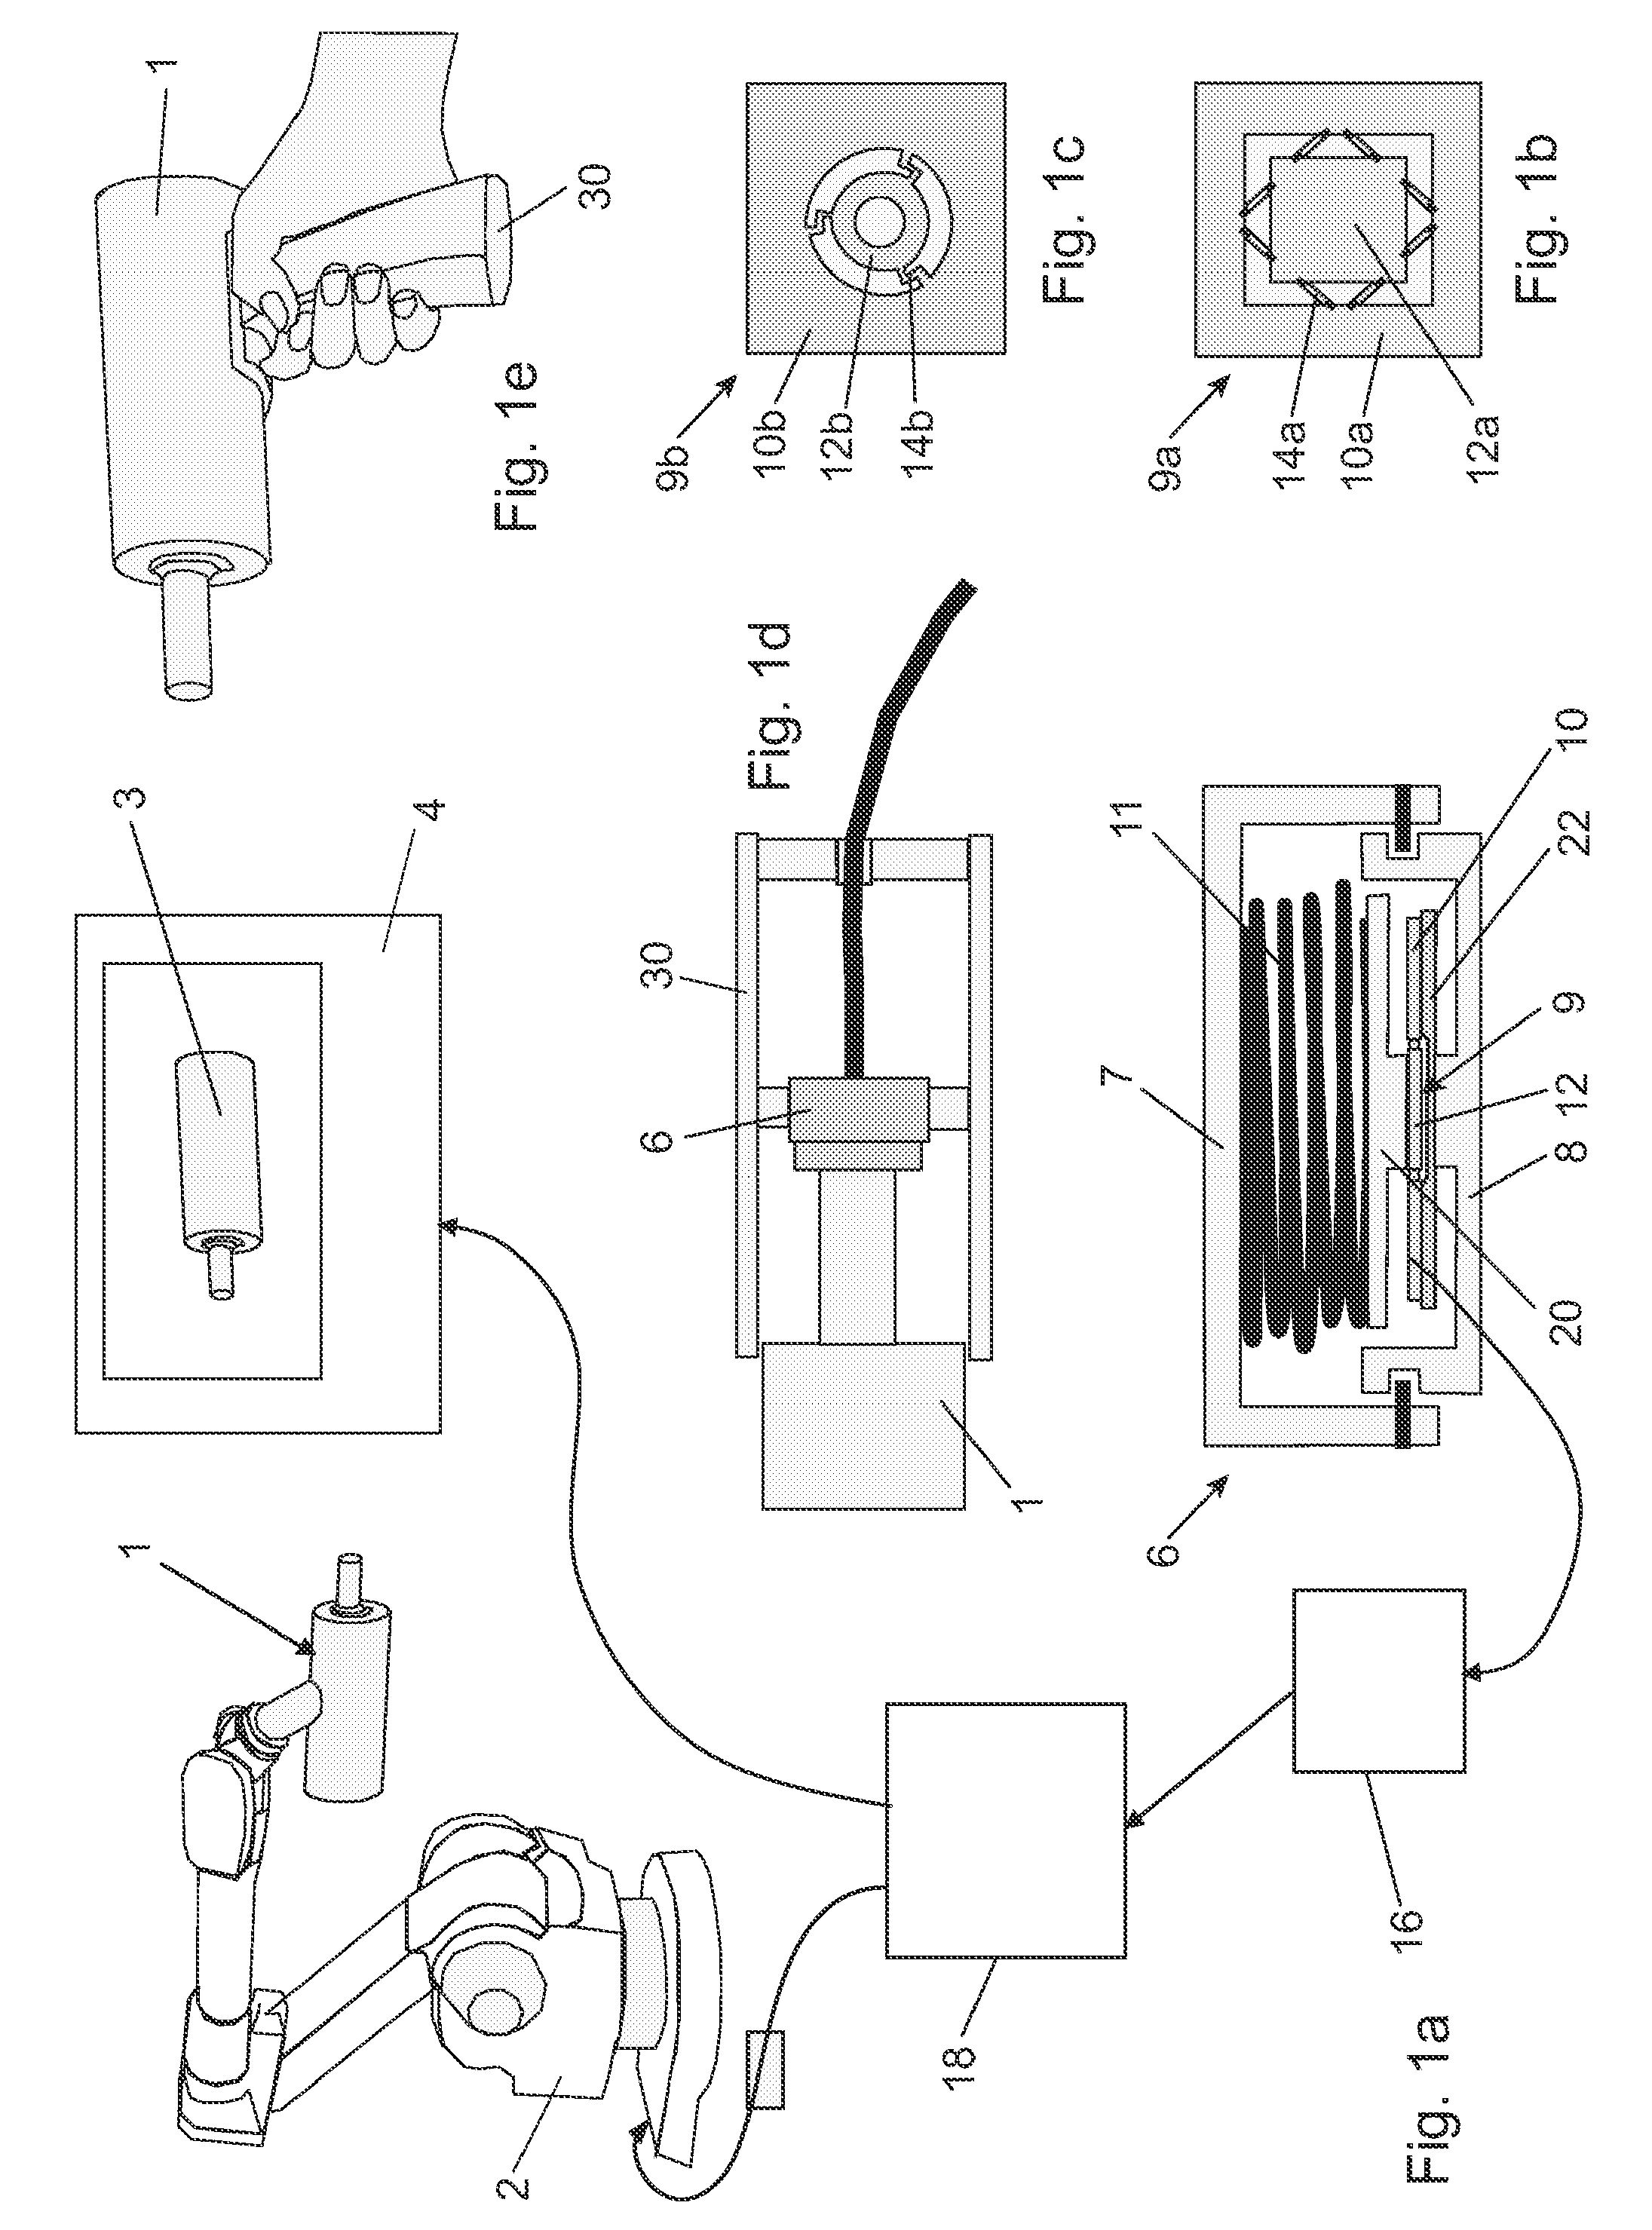 System for controlling the position and orientation of an object in dependence on received forces and torques from a user